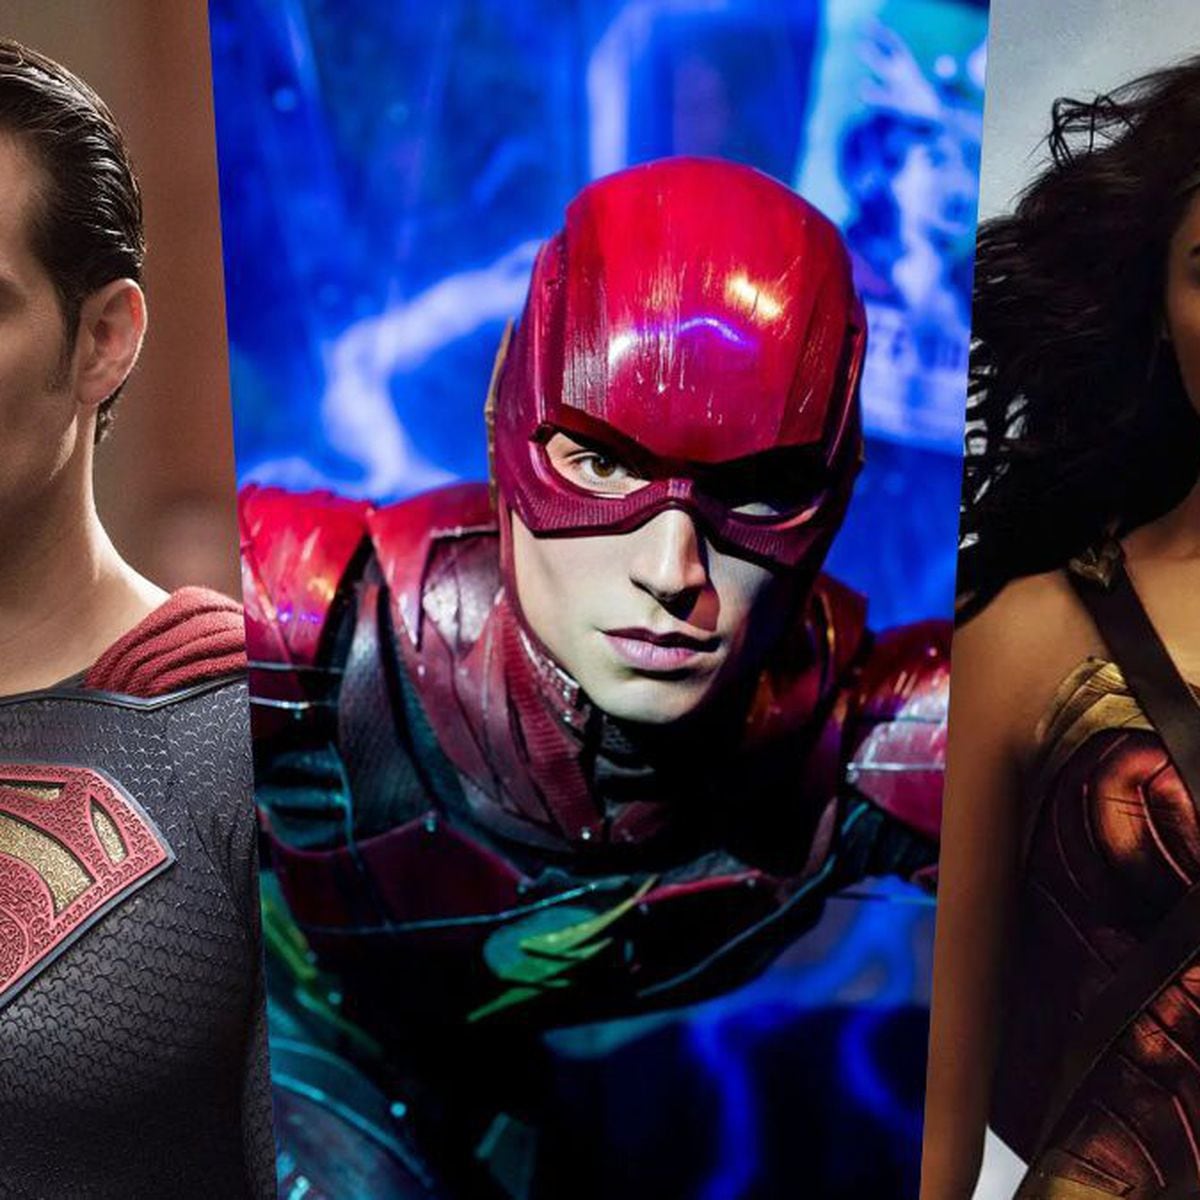 DC cuts Henry Cavill and Gal Gadot's cameos in The Flash - Meristation